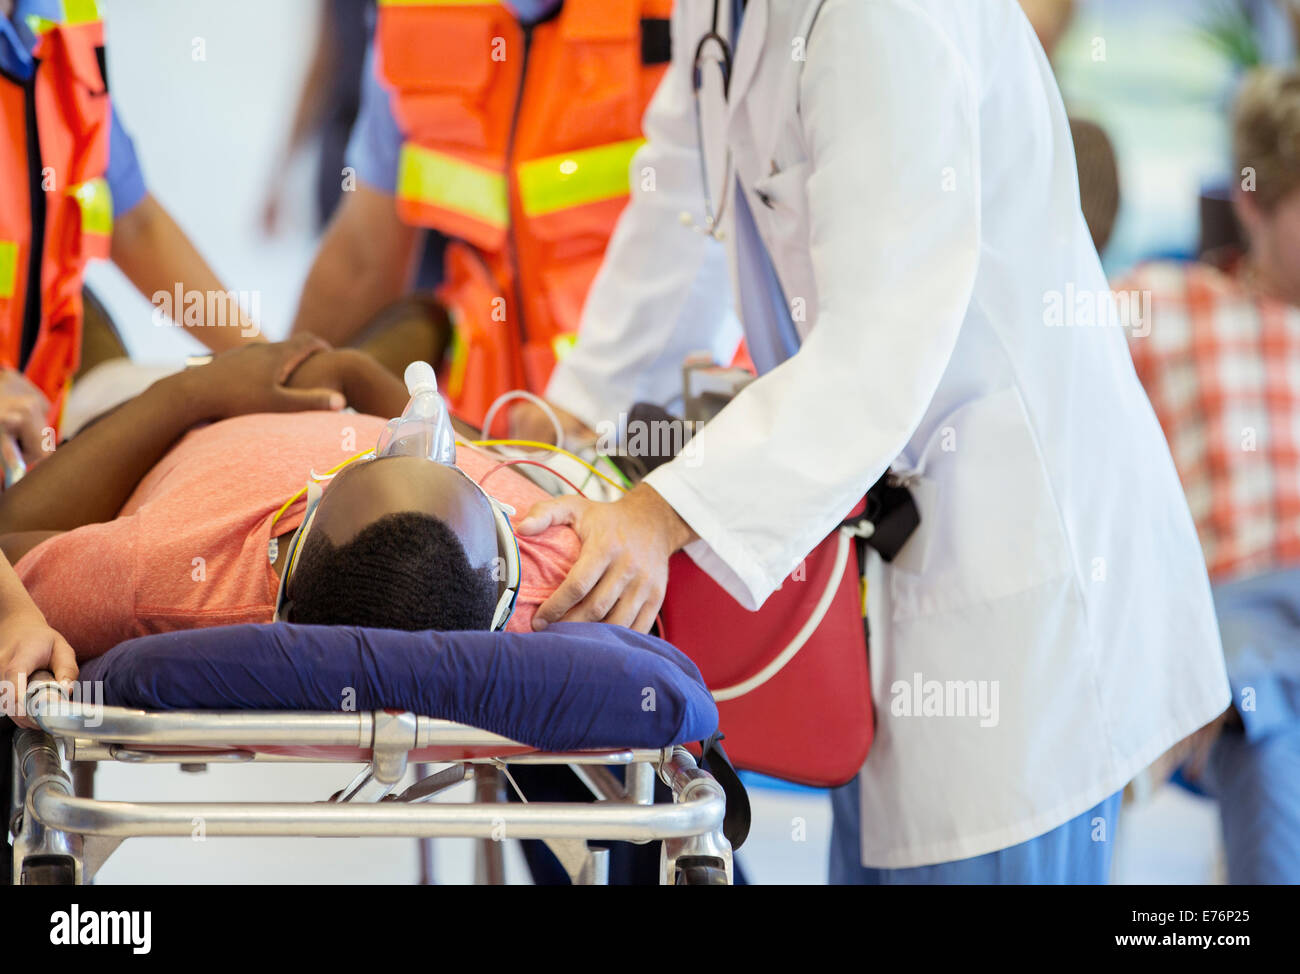 Doctor examining patient on stretcher Stock Photo